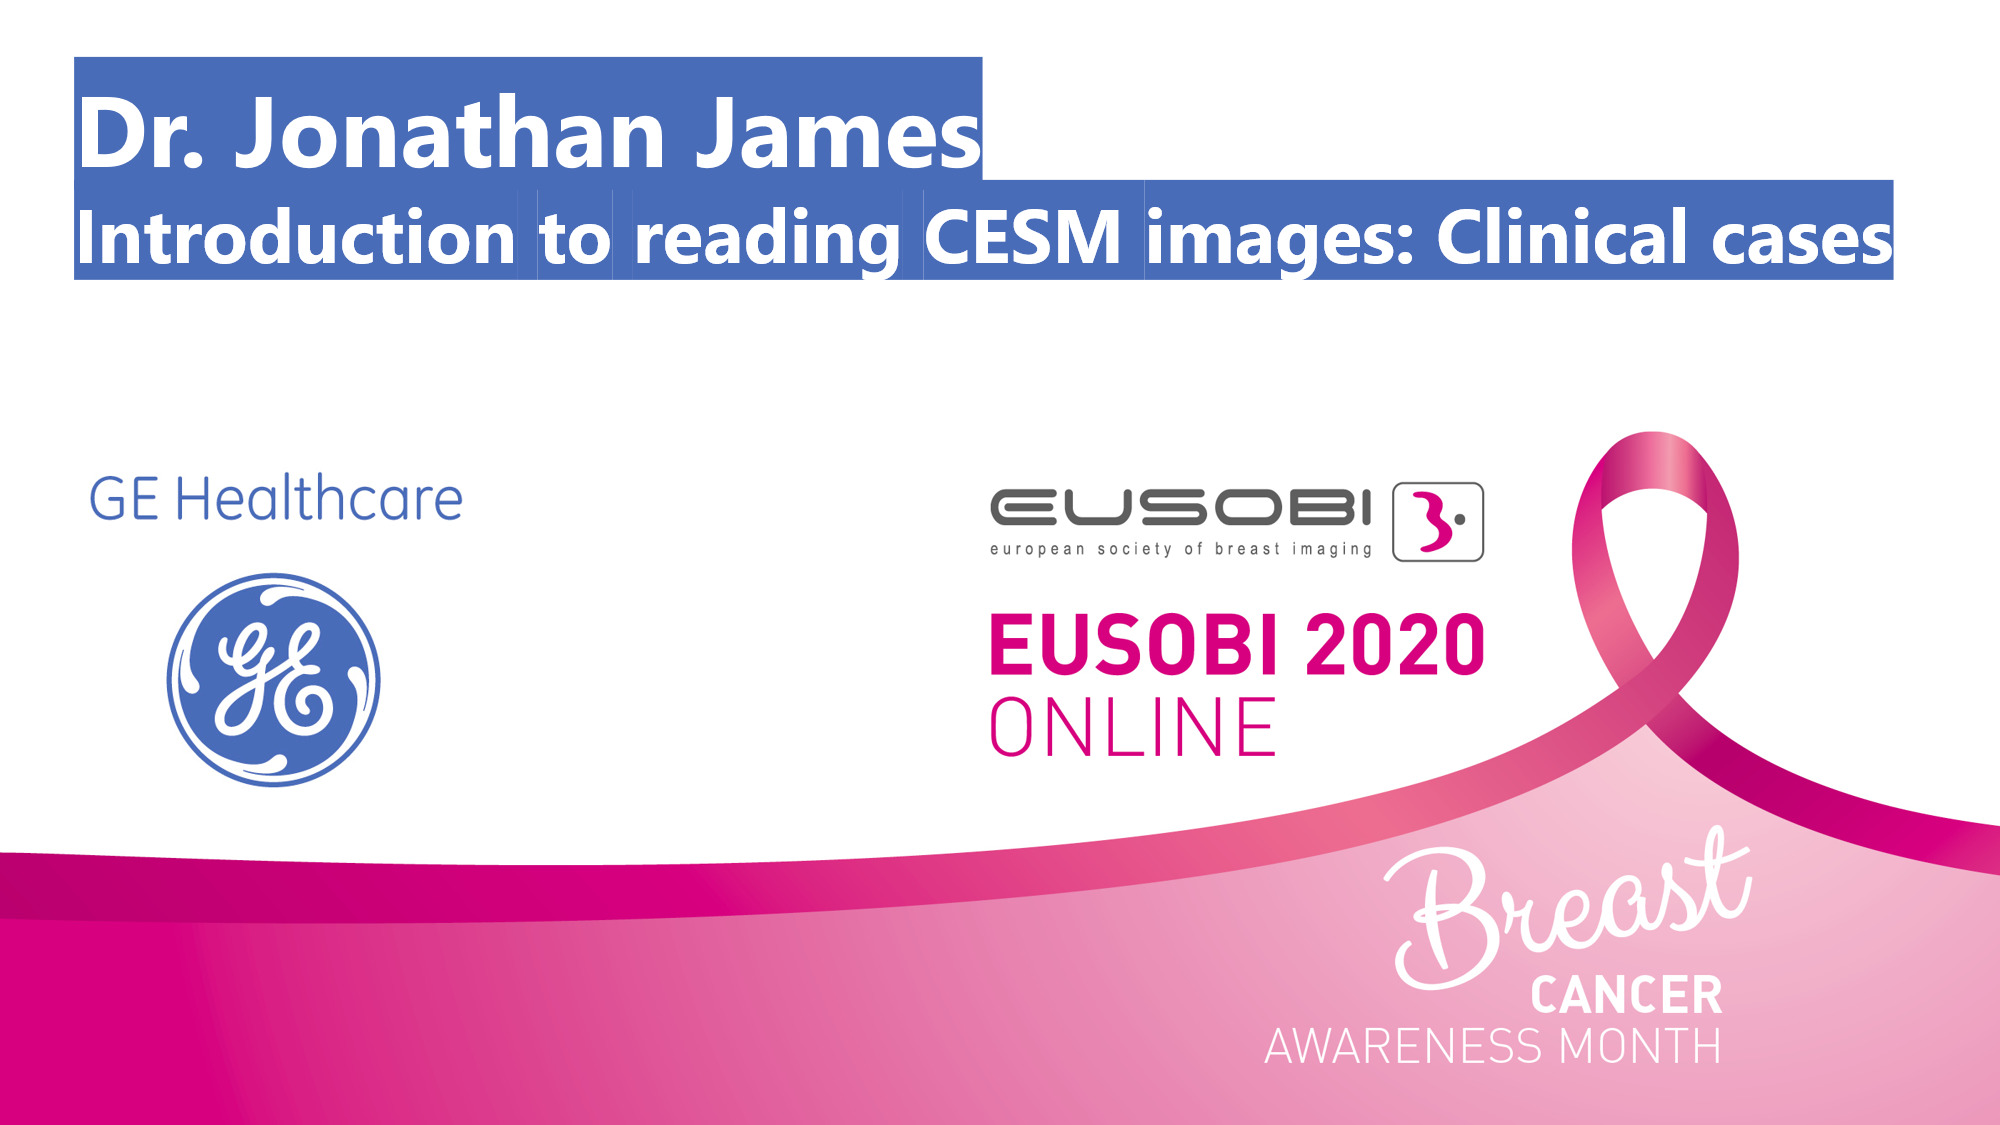 I20 – Introduction to reading CESM images: Clinical cases